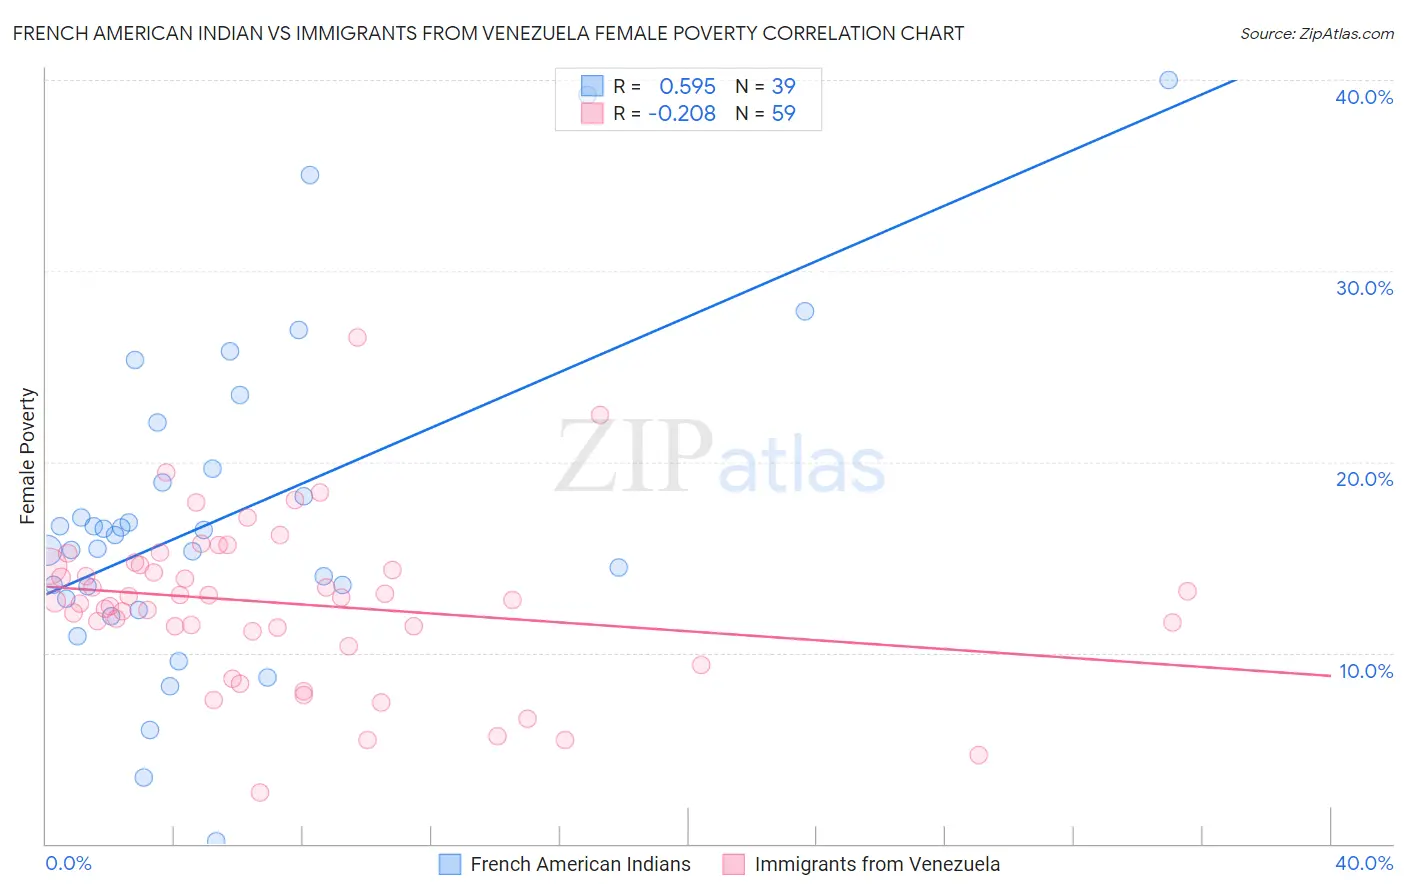 French American Indian vs Immigrants from Venezuela Female Poverty